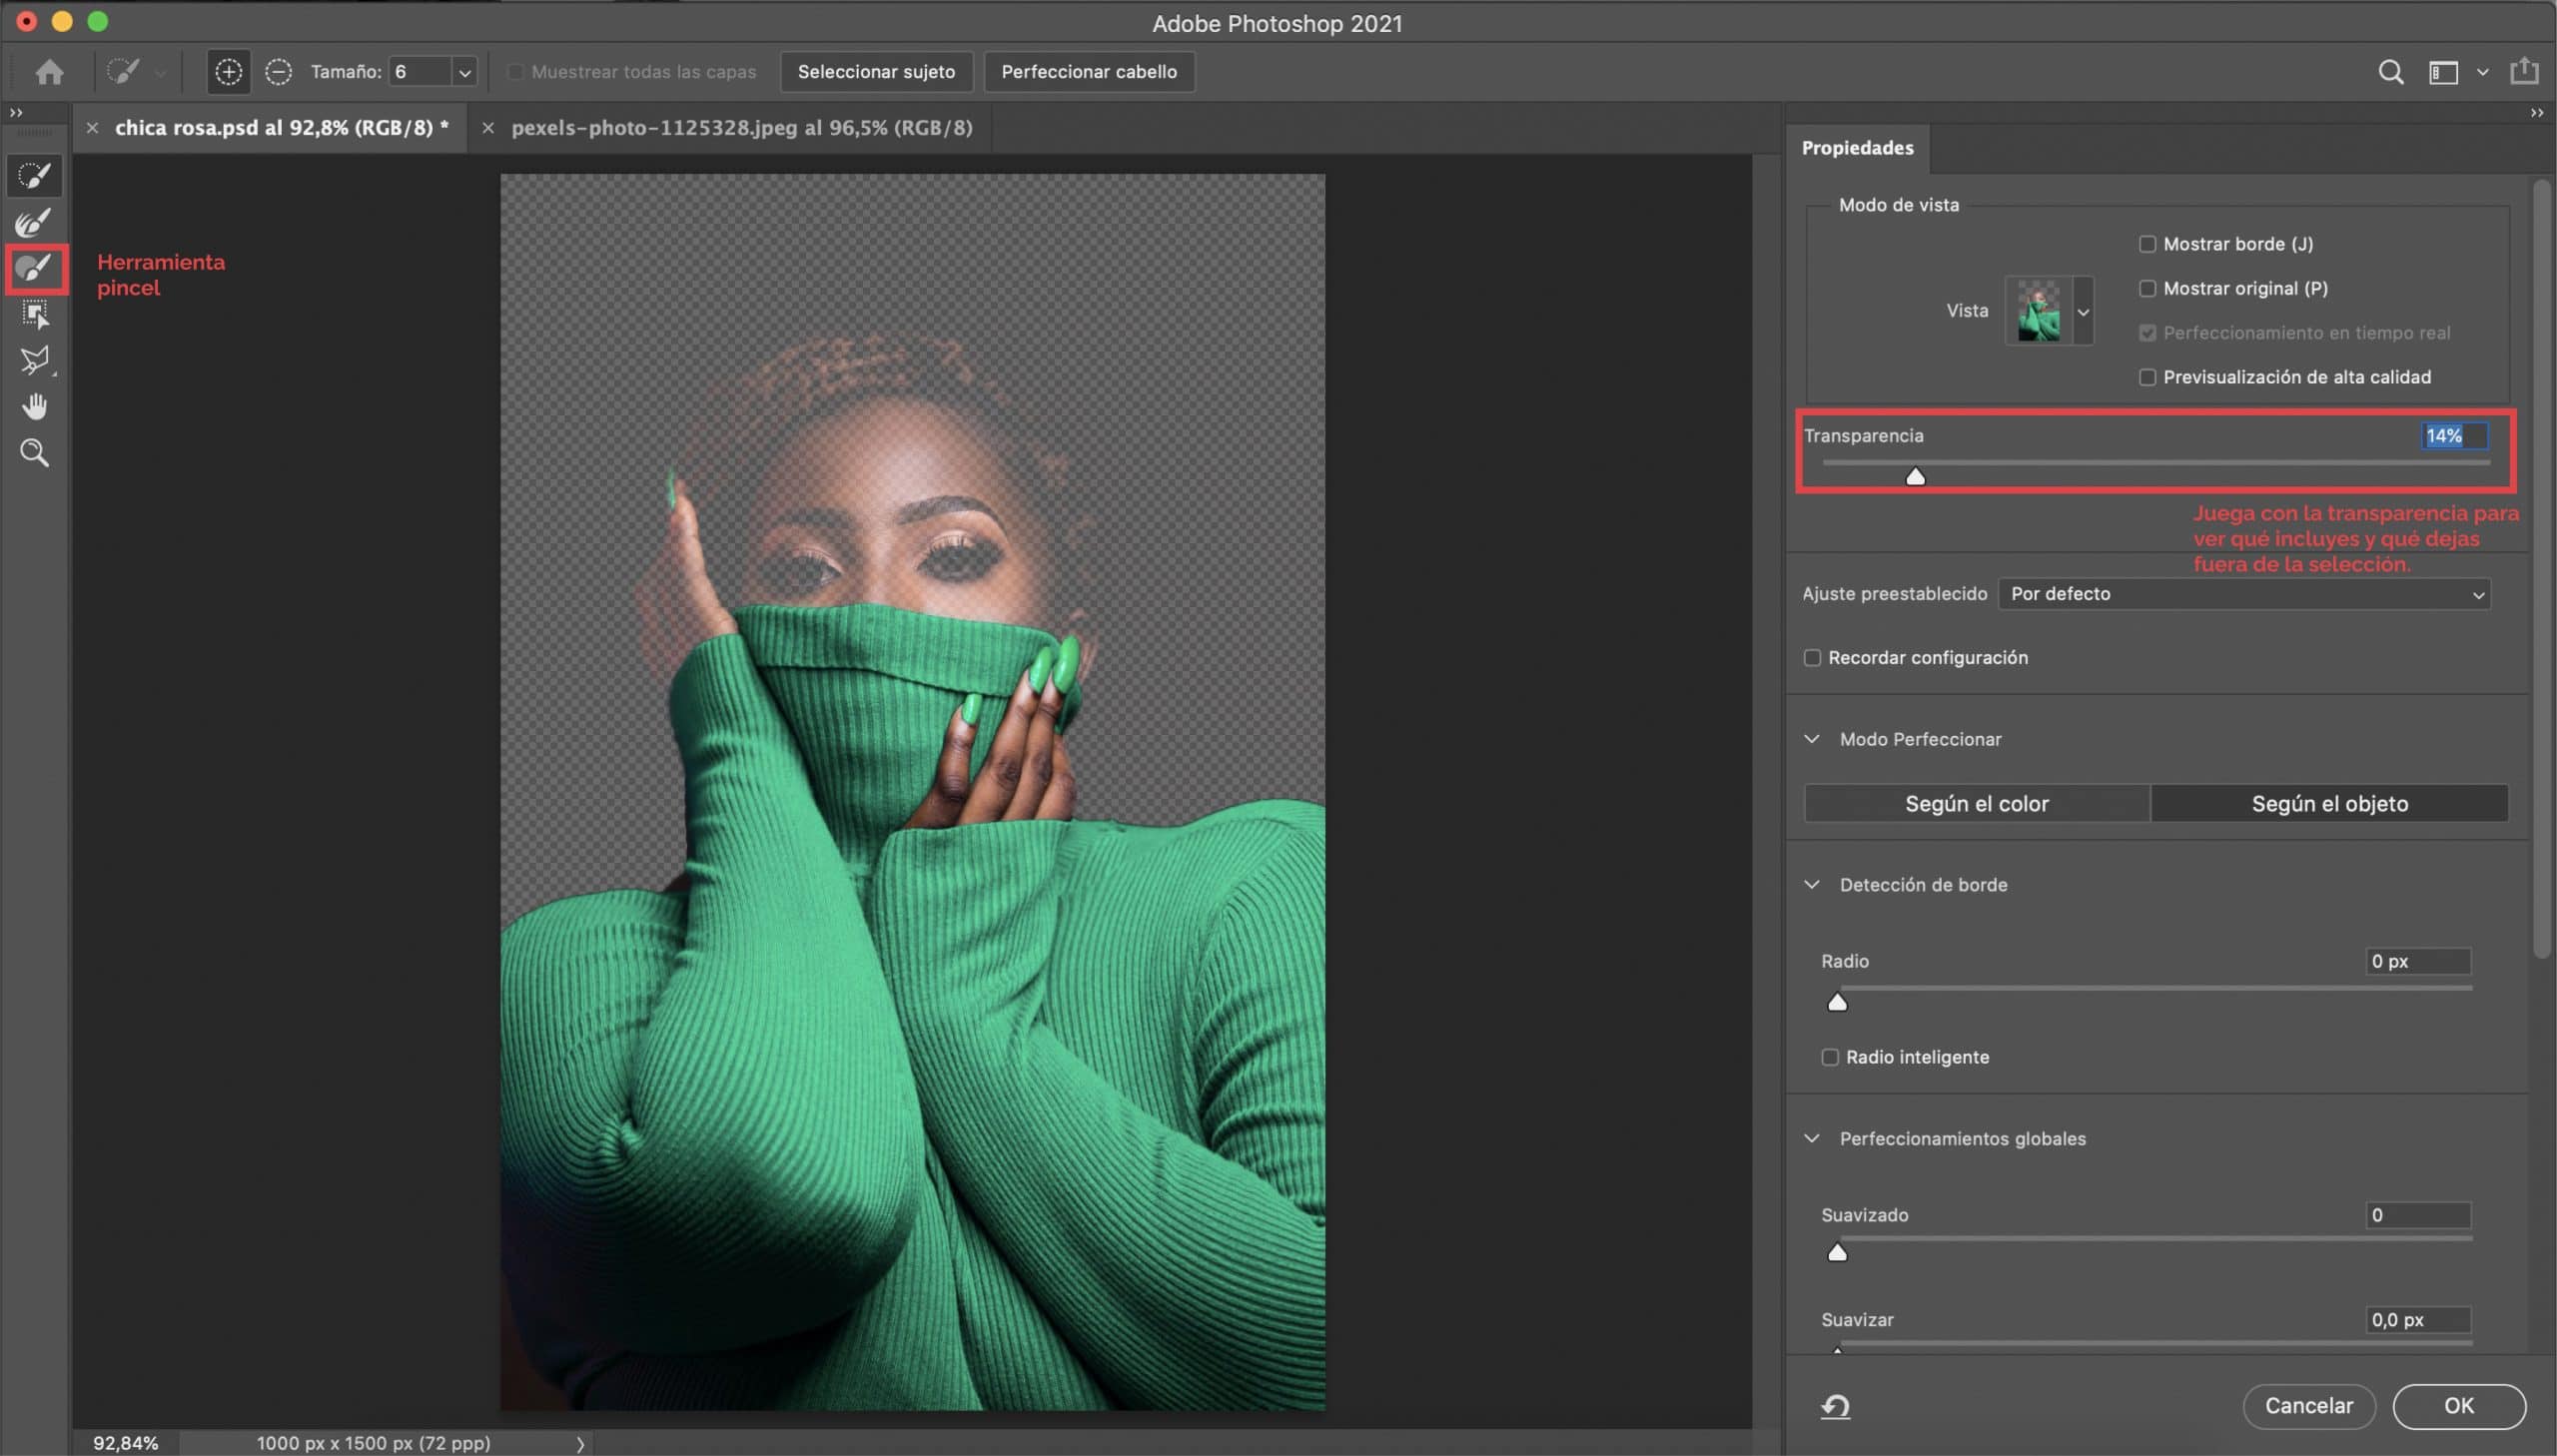 How to apply Photoshop selection mask